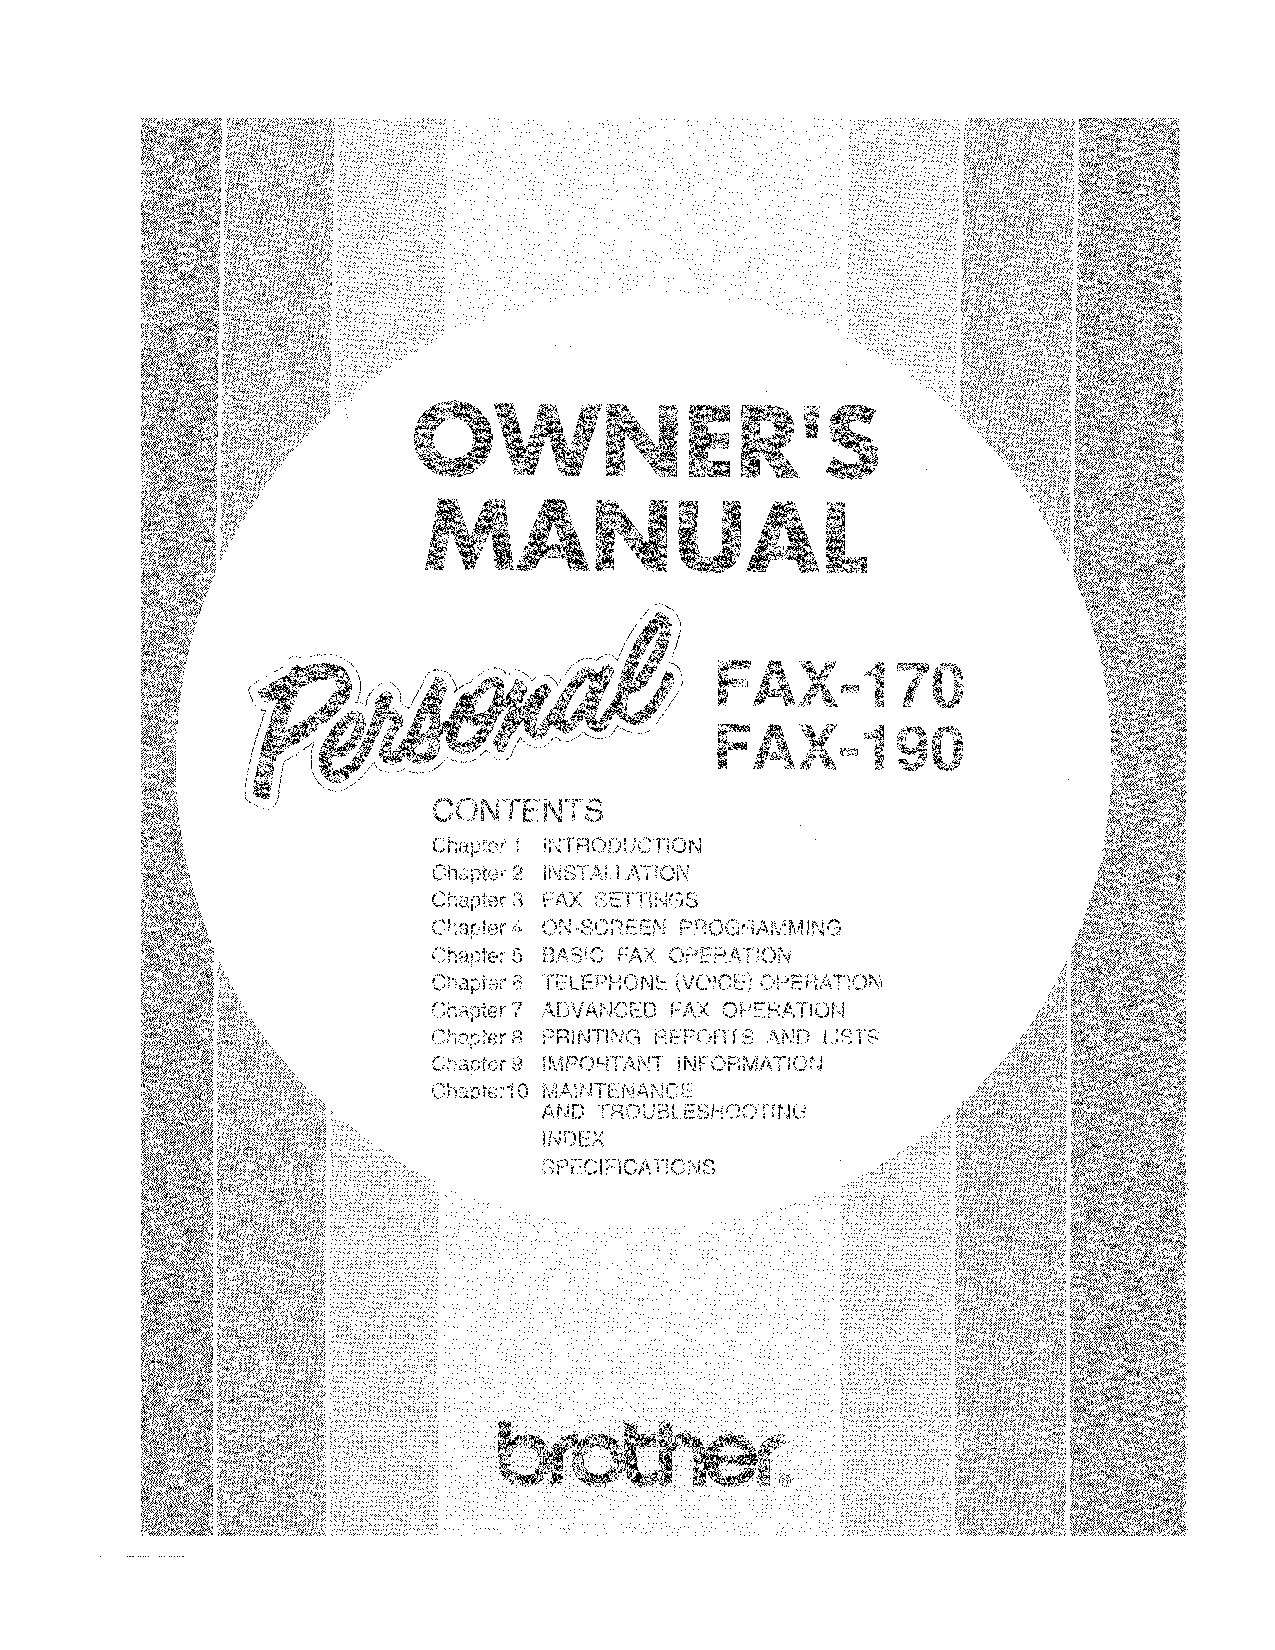 Brother 170, 190 User Manual